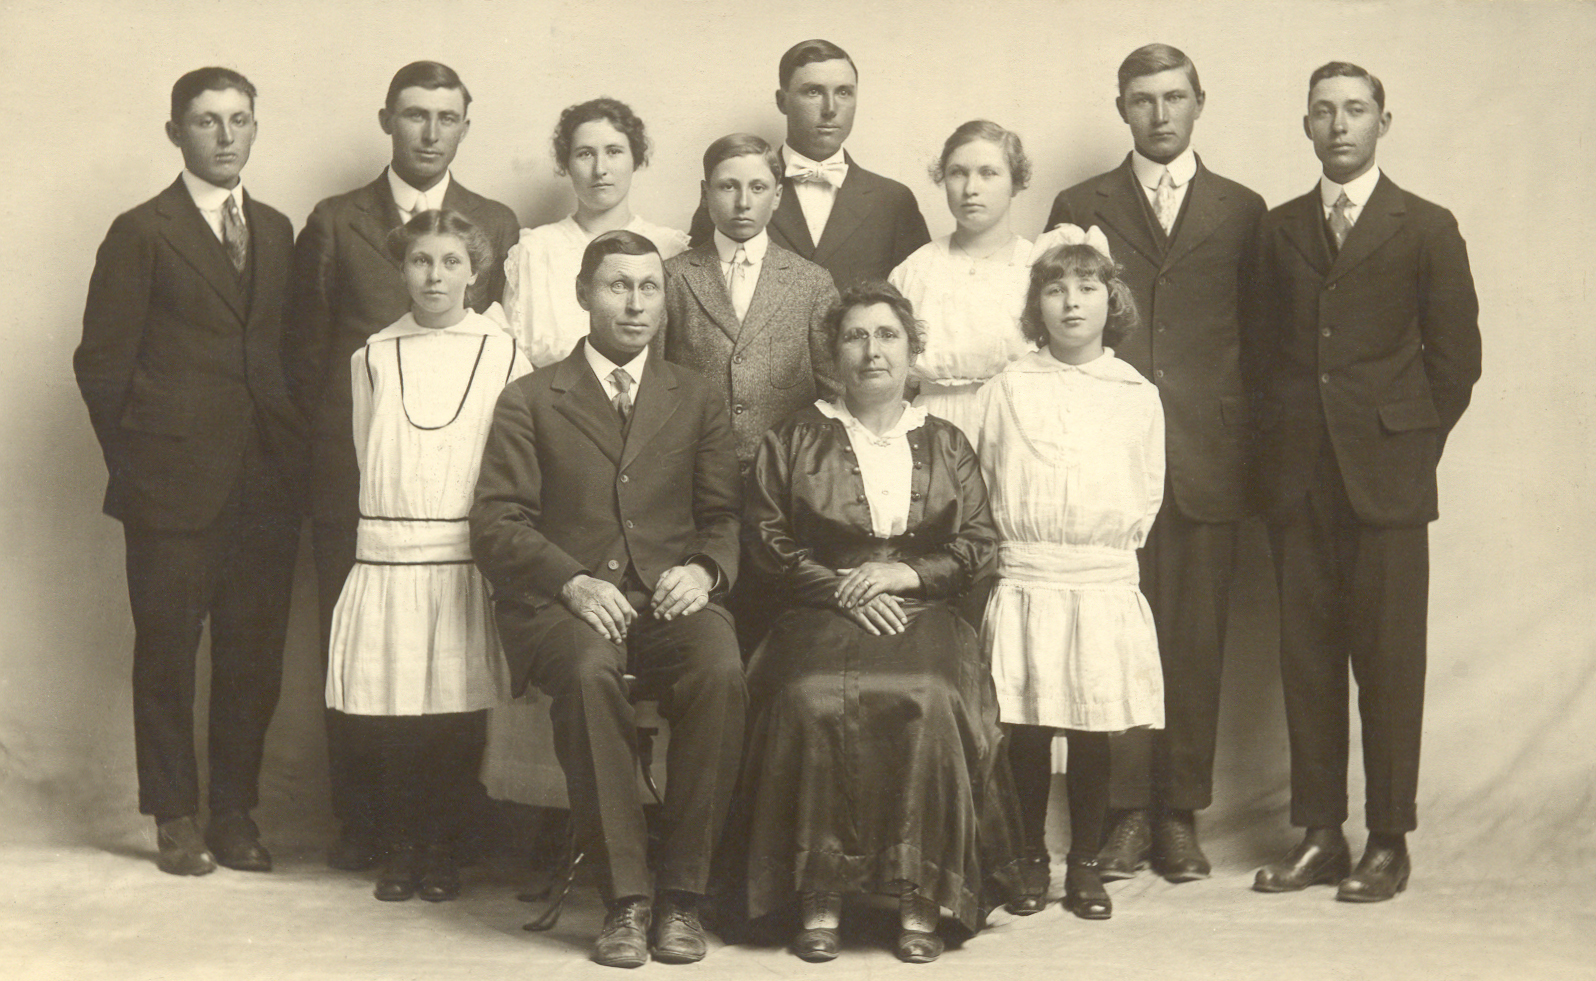 The Janzen family, 1918. Seated Henry and Carrie, standing, left to right, Herbert, Henry, Nellie in front of Henry, Rosie, Wilbert, Albert, Edna, Thelma in front of Edna, Roy, and Edward